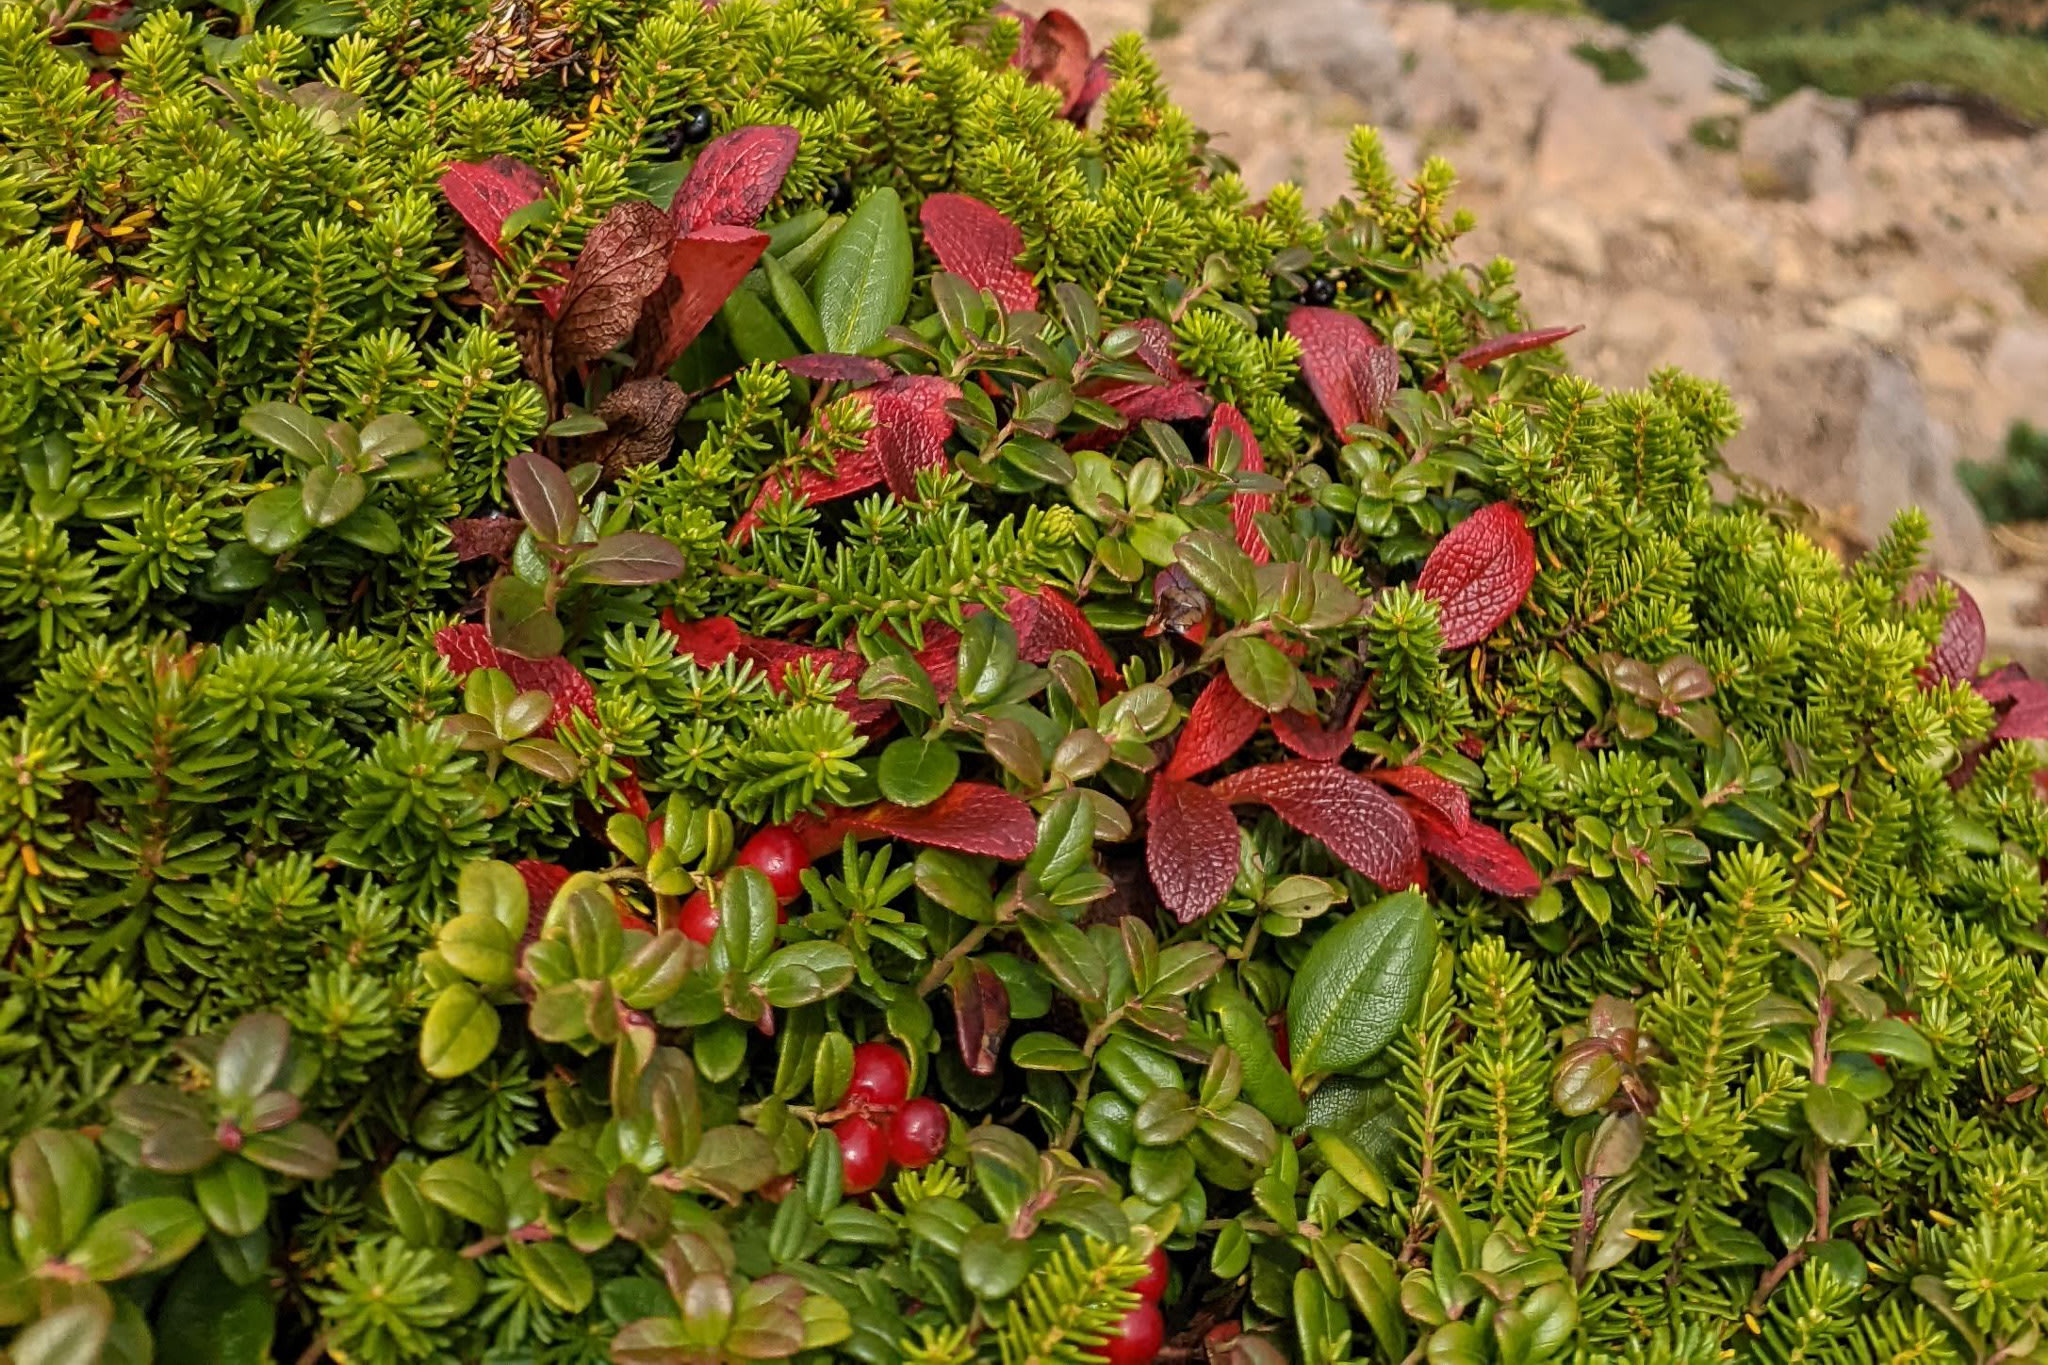 A close-up of lingonberries growing wild on a mountain. They are small, round berries amongst small, rounded leaves. The leaves are displaying autumn colouration.